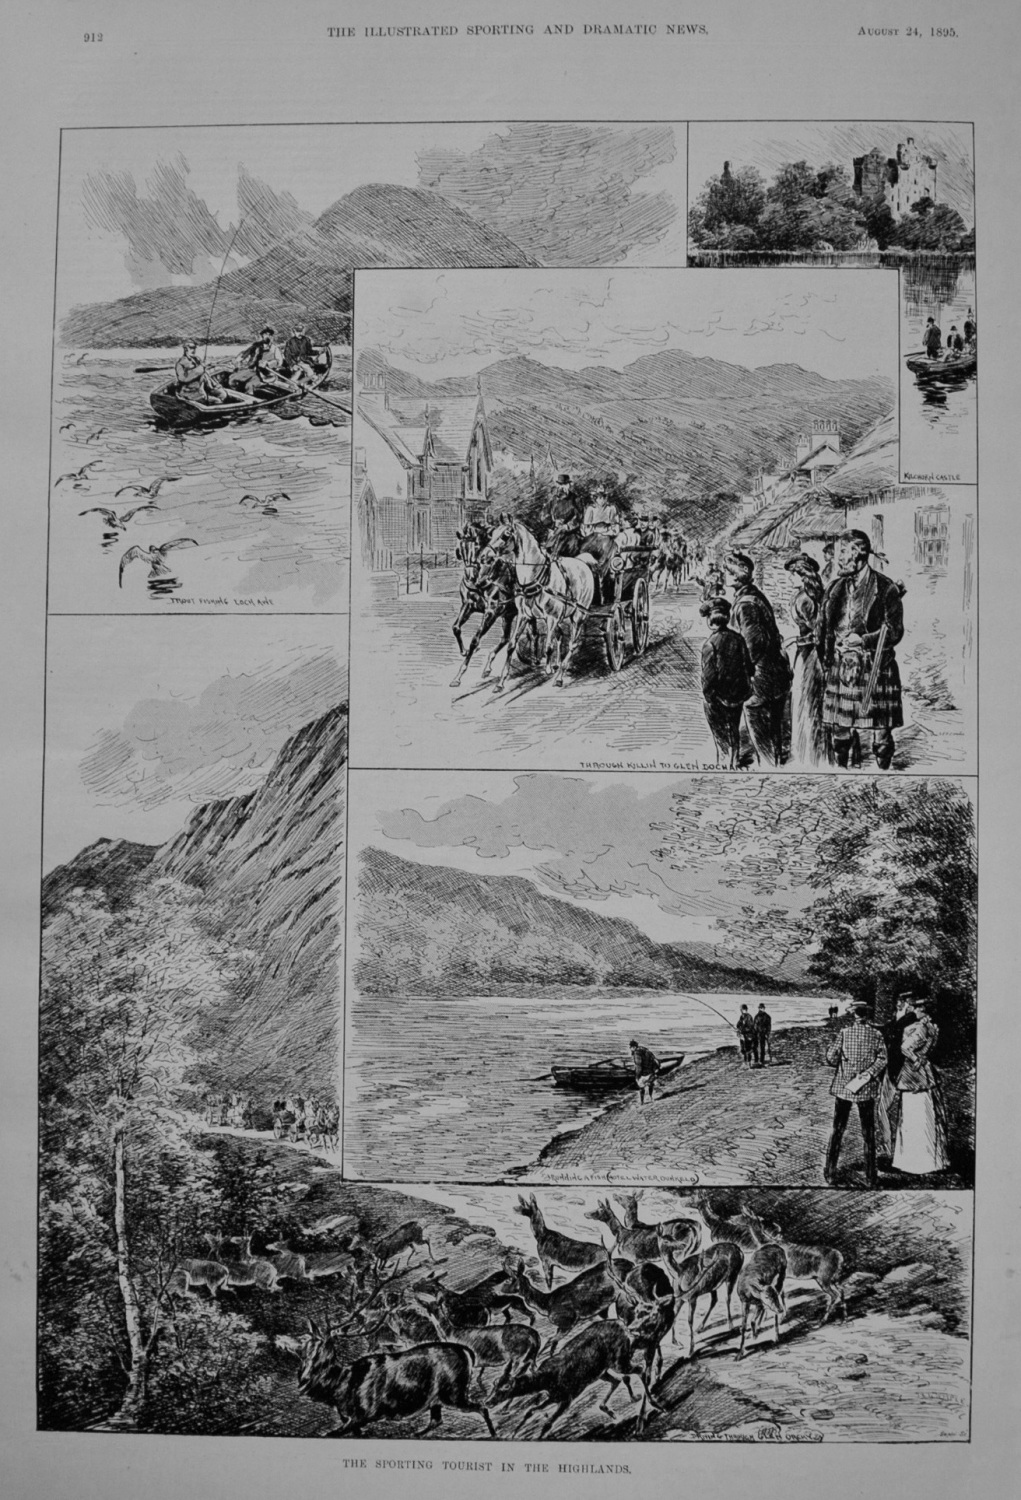 The Sporting Tourist in the Highlands. 1895